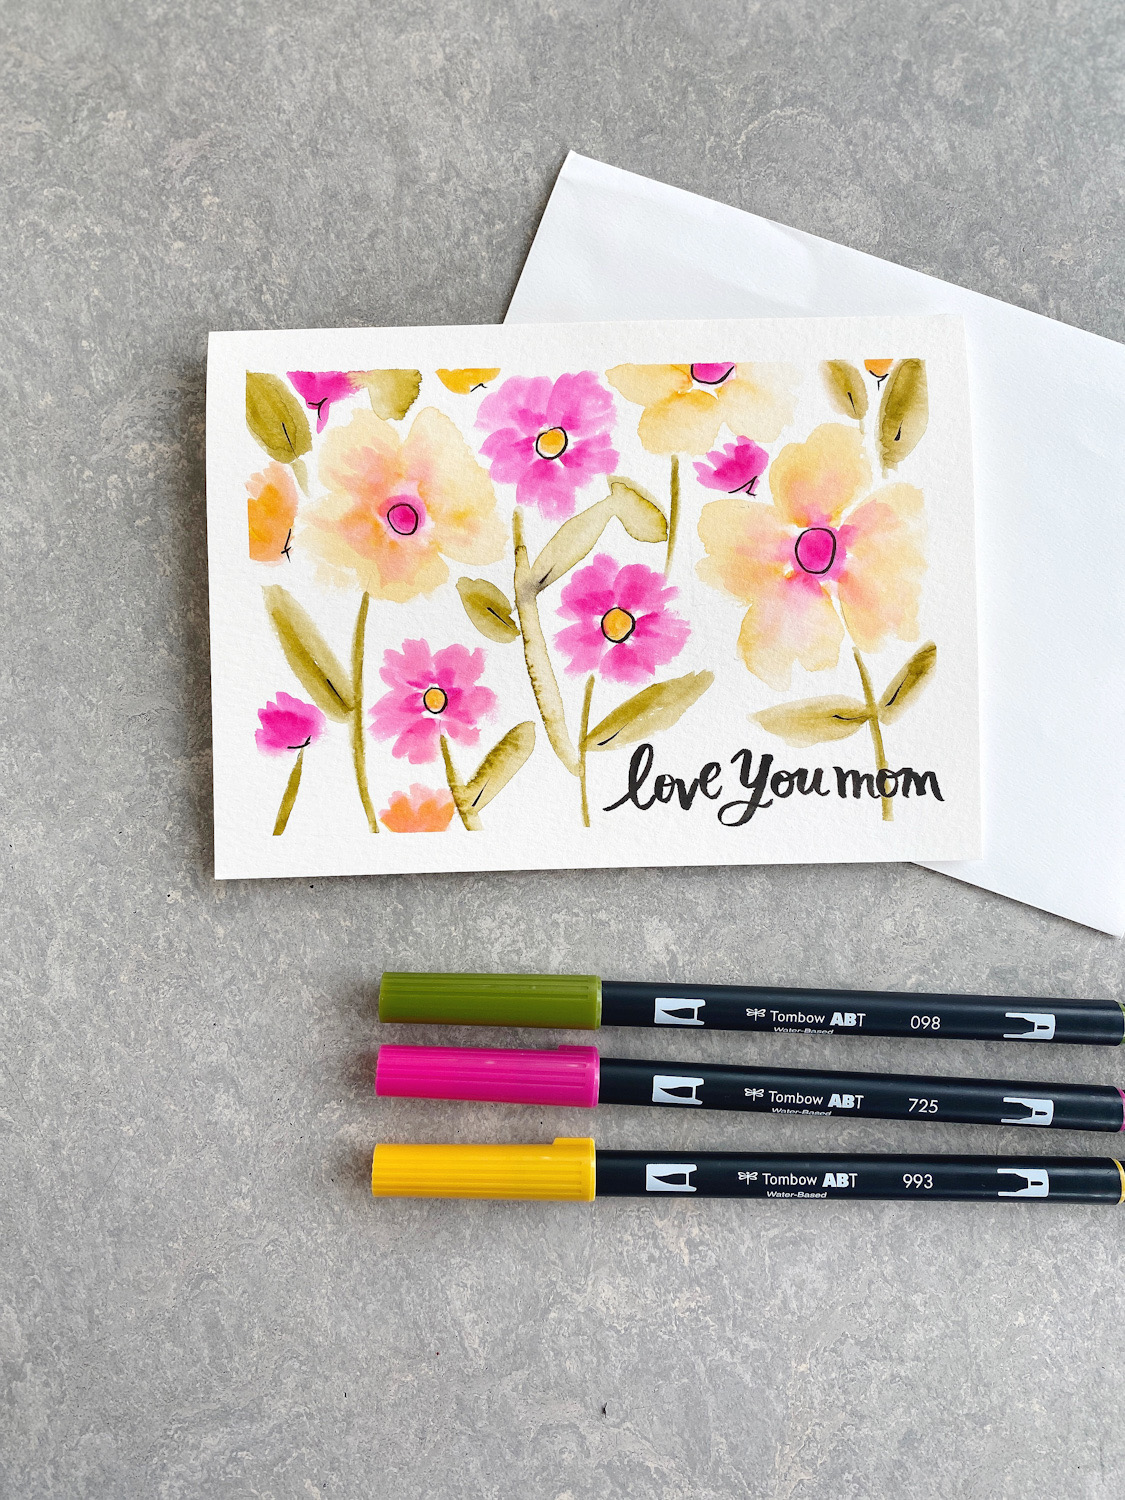 Using Tombow Dual Brush Pens for Watercoloring - Tombow USA Blog